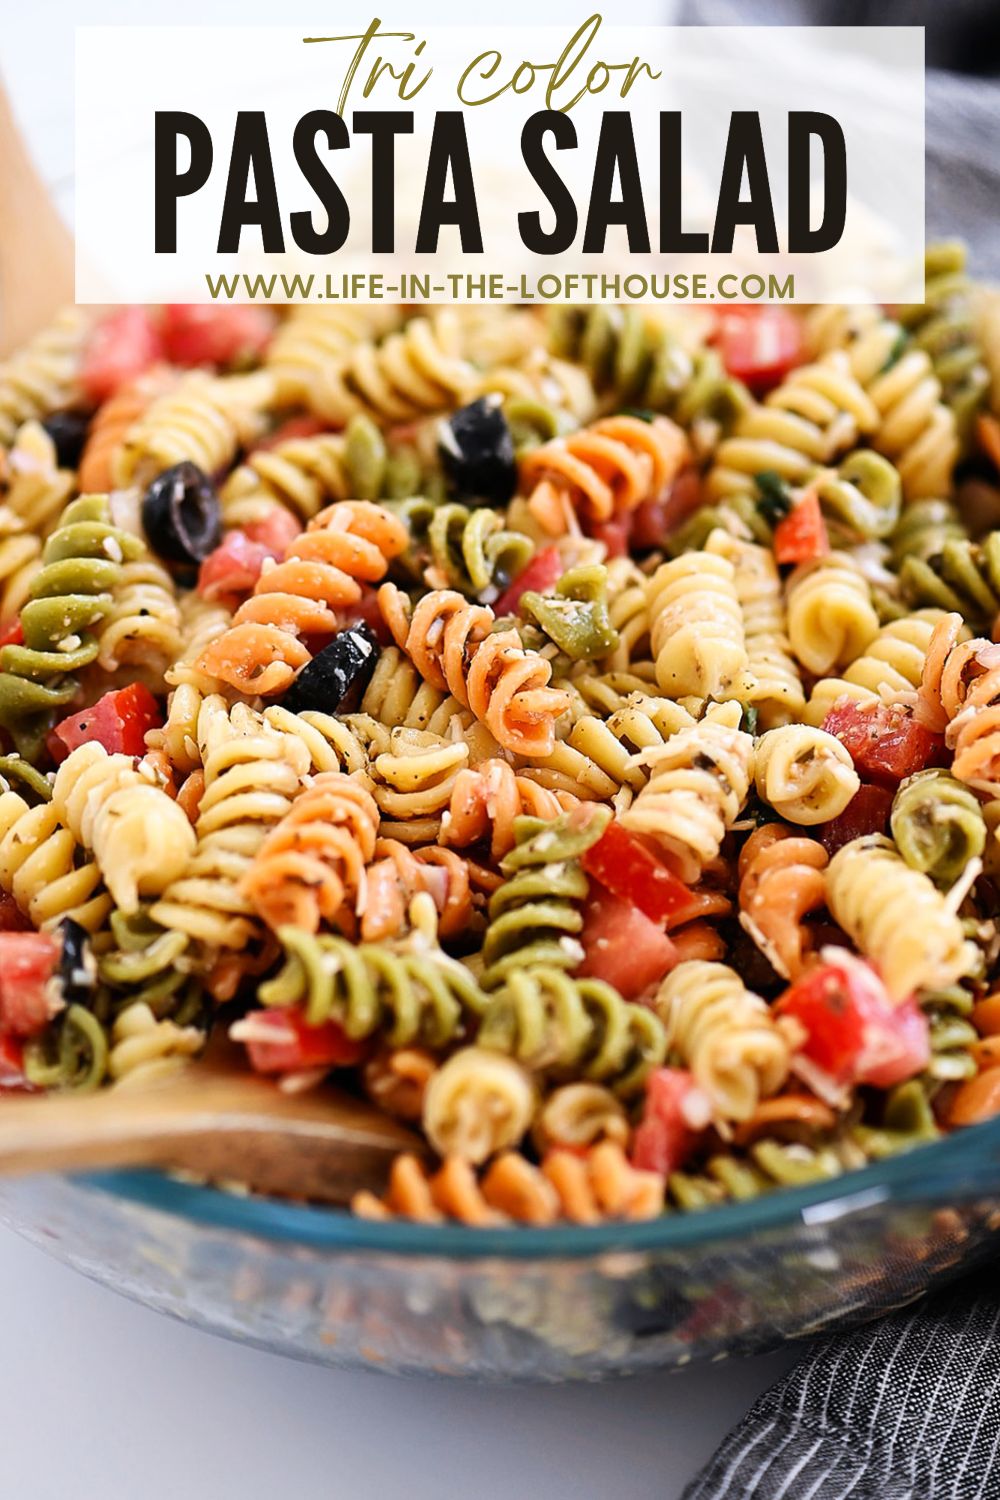 Tri Color Pasta Salad is filled with noodles, fresh veggies, and Parmesan cheese. It’s tossed in a creamy Caesar dressing and basil pesto. Life-in-the-Lofthouse.com